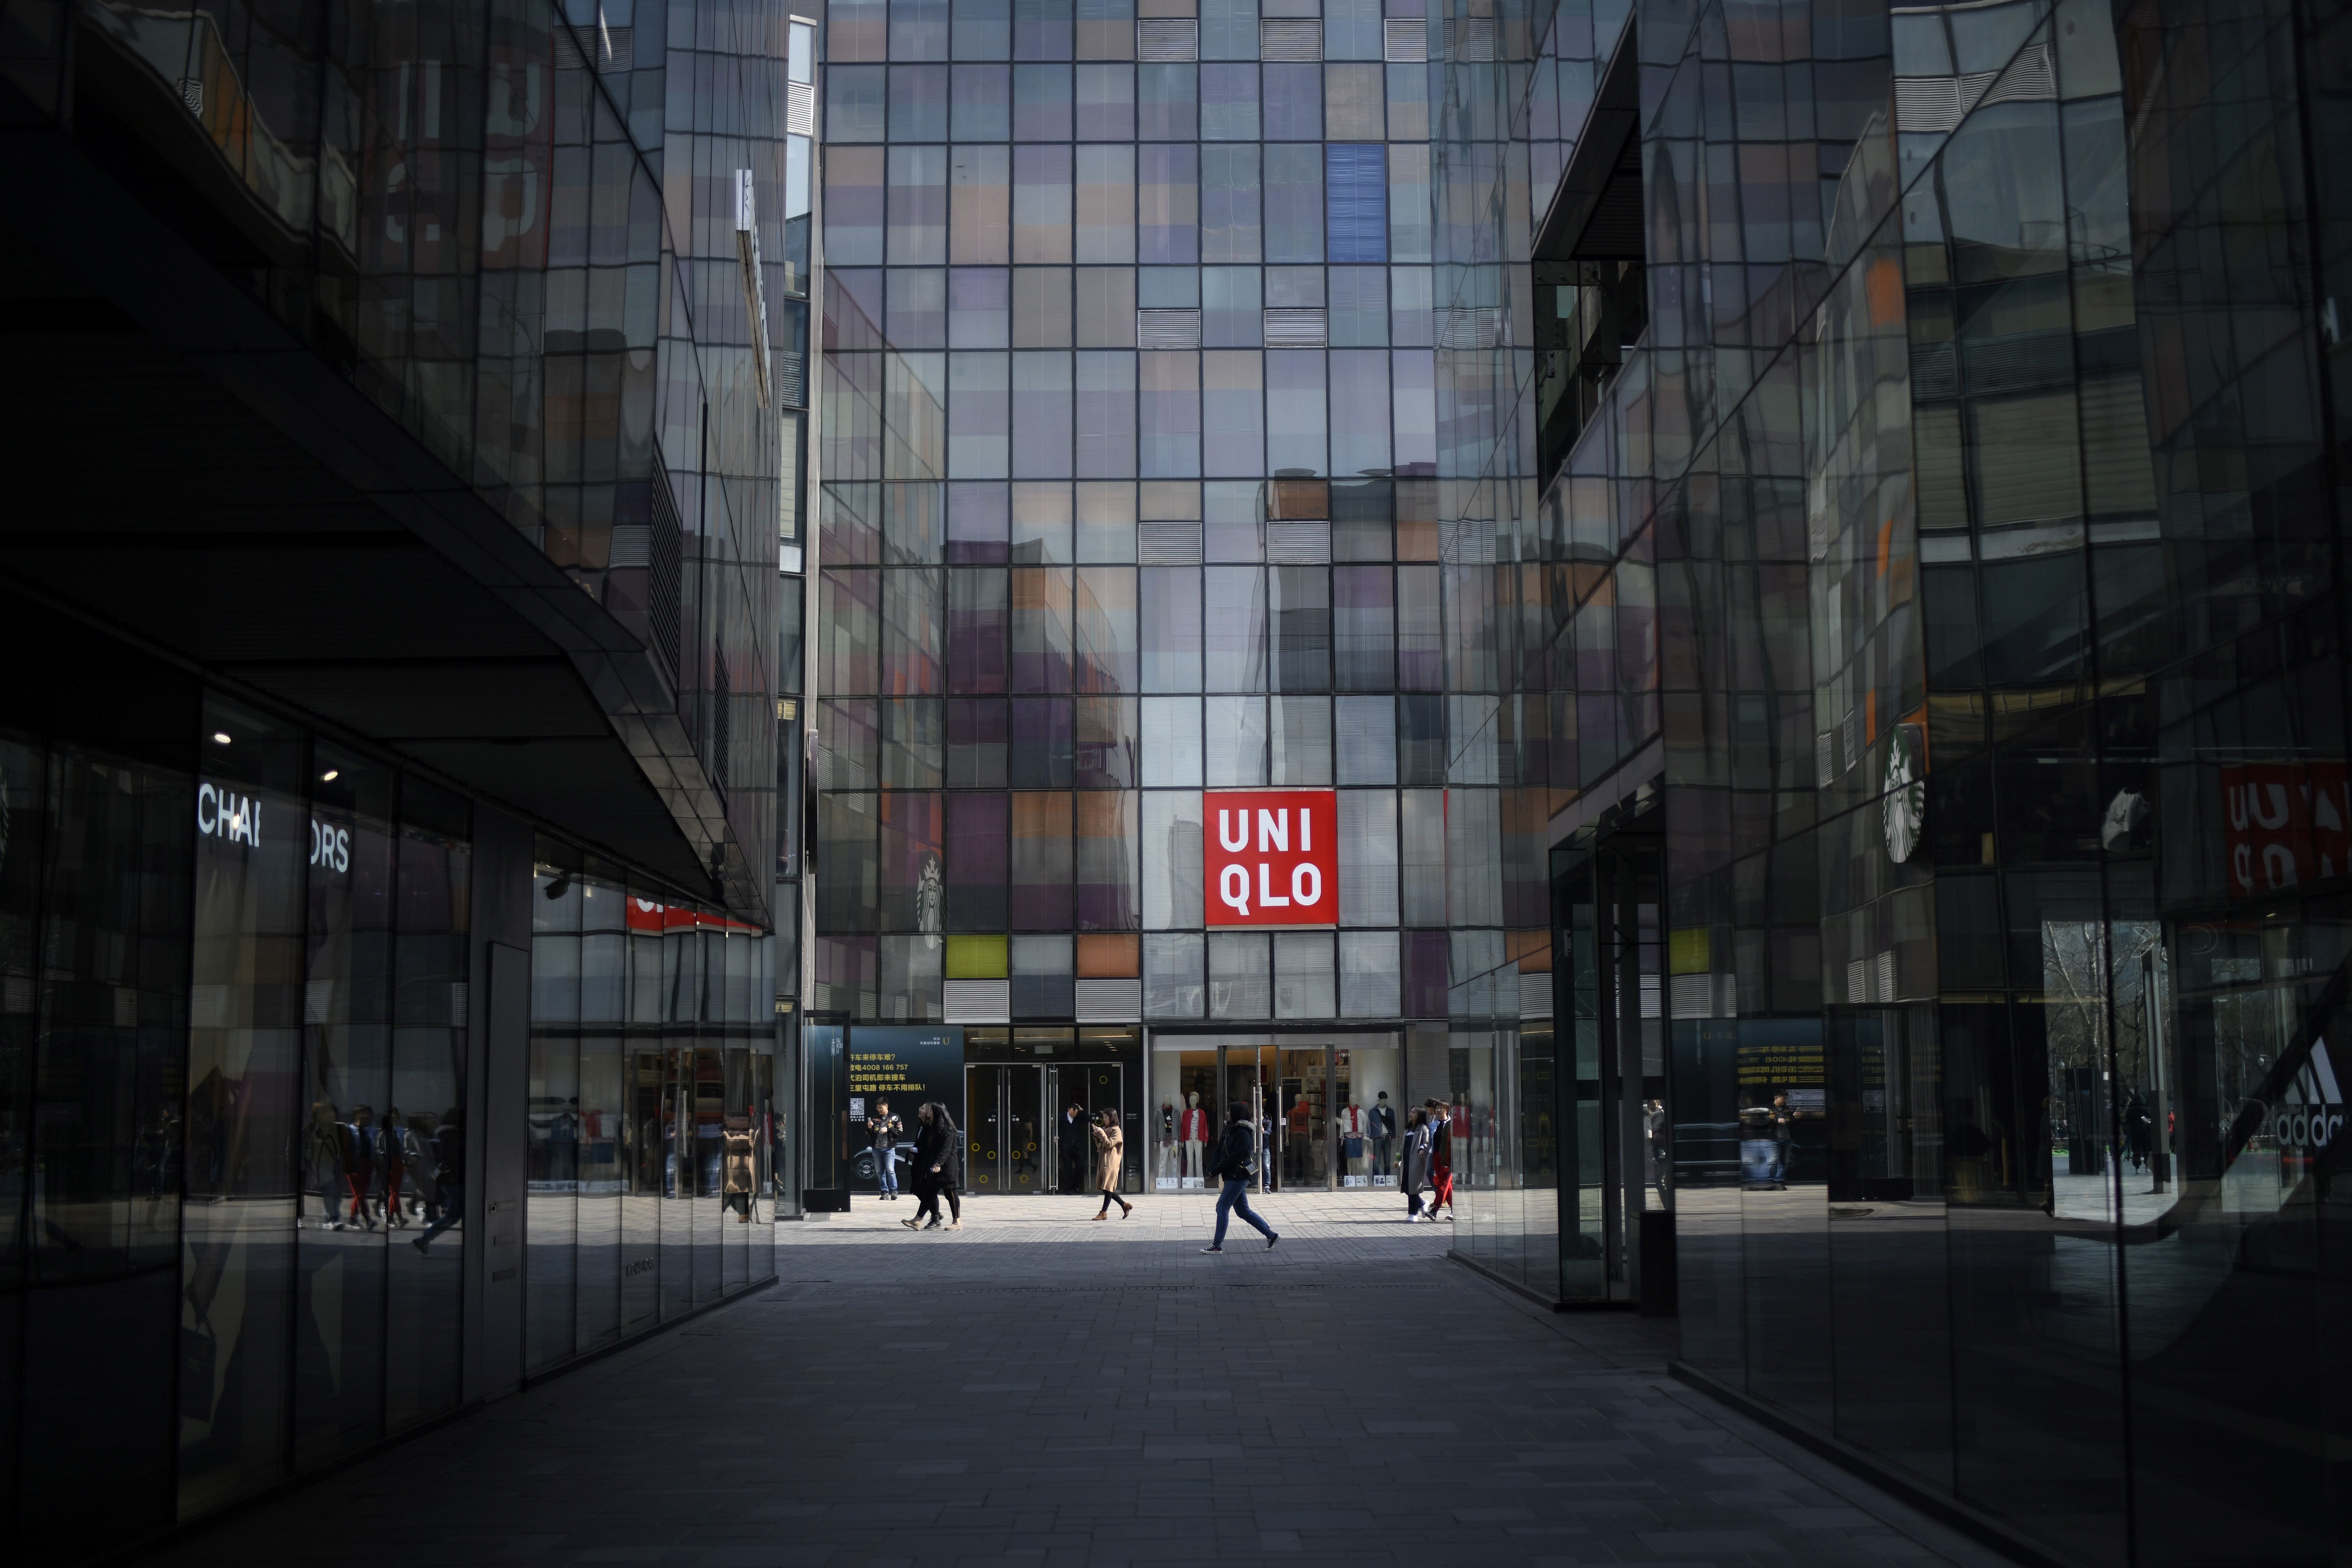 People walk past a Uniqlo store in Beijing on February 28, 2019